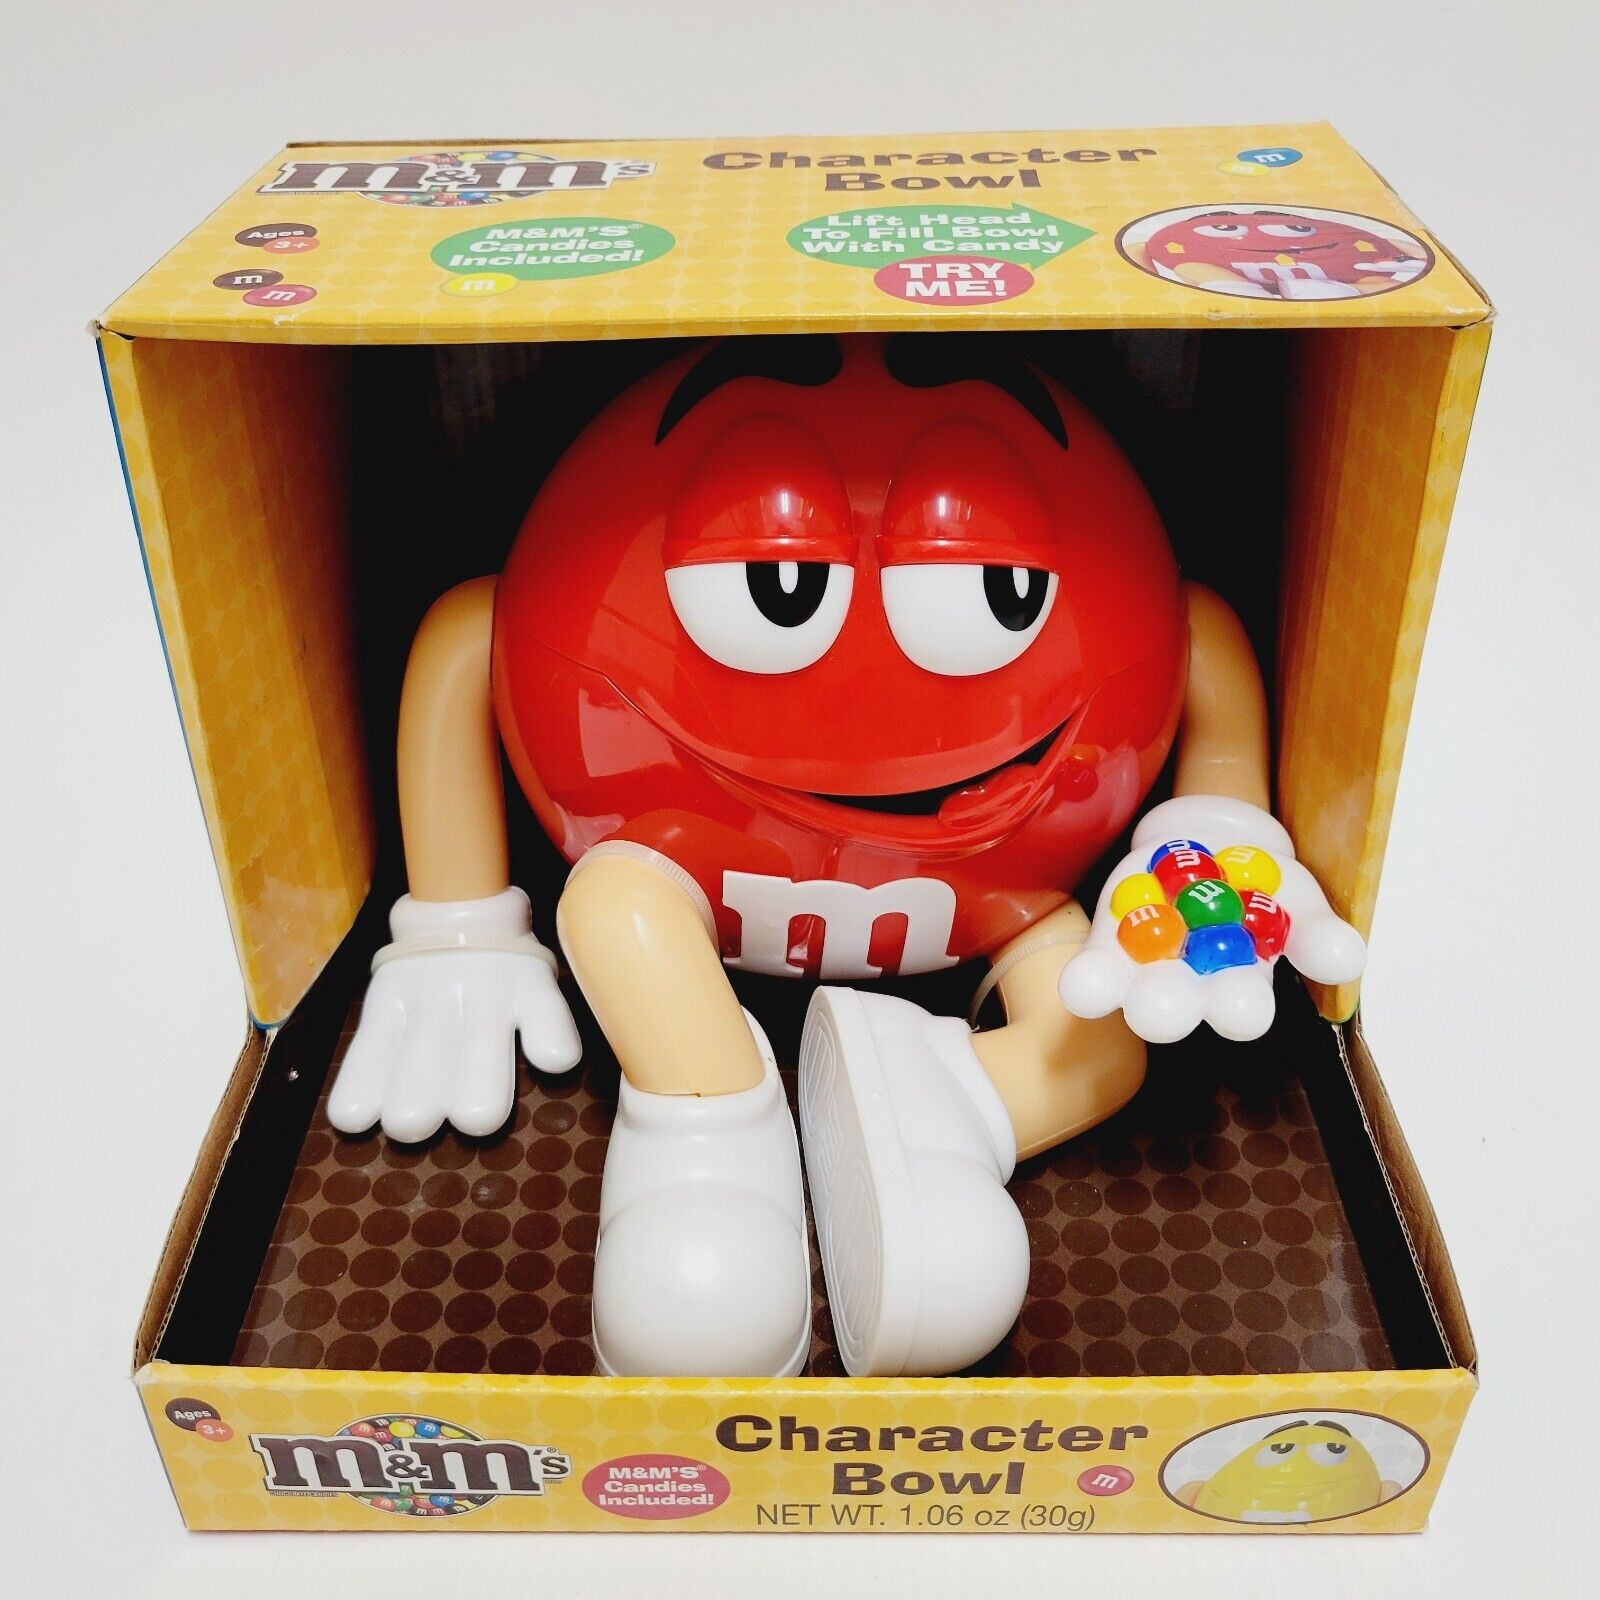 NEW M&Ms Candies Character Bowl Red in Box 2013 Display Figure